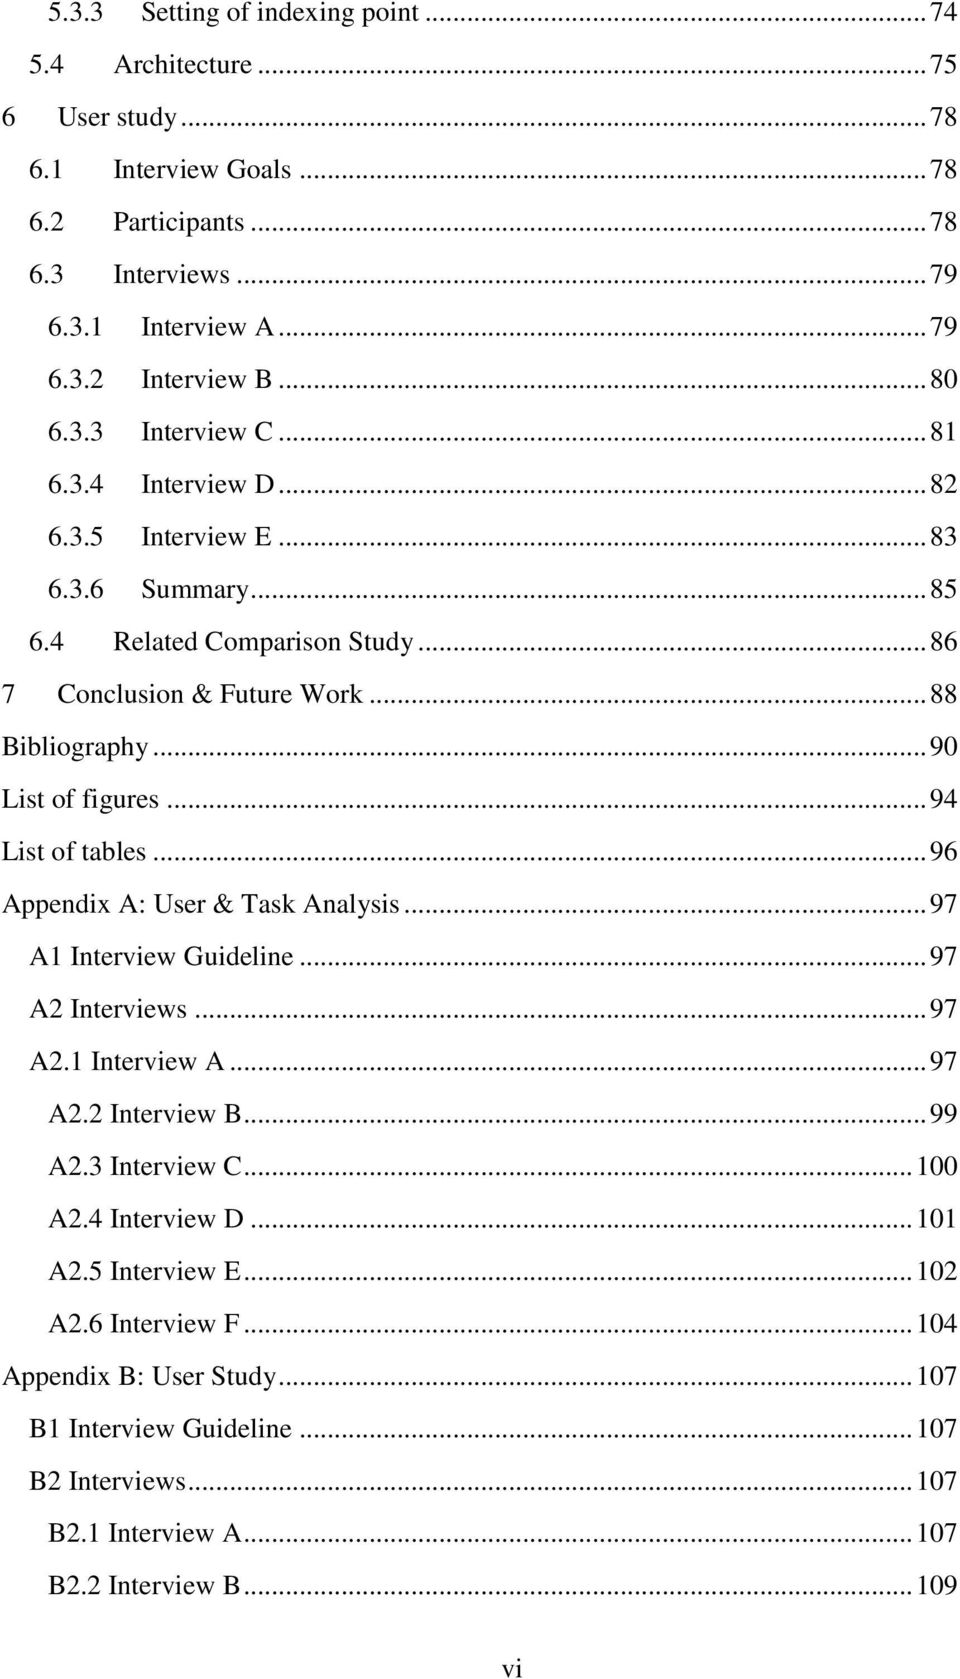 .. 90 List of figures... 94 List of tables... 96 Appendix A: User & Task Analysis... 97 A1 Interview Guideline... 97 A2 Interviews... 97 A2.1 Interview A... 97 A2.2 Interview B... 99 A2.